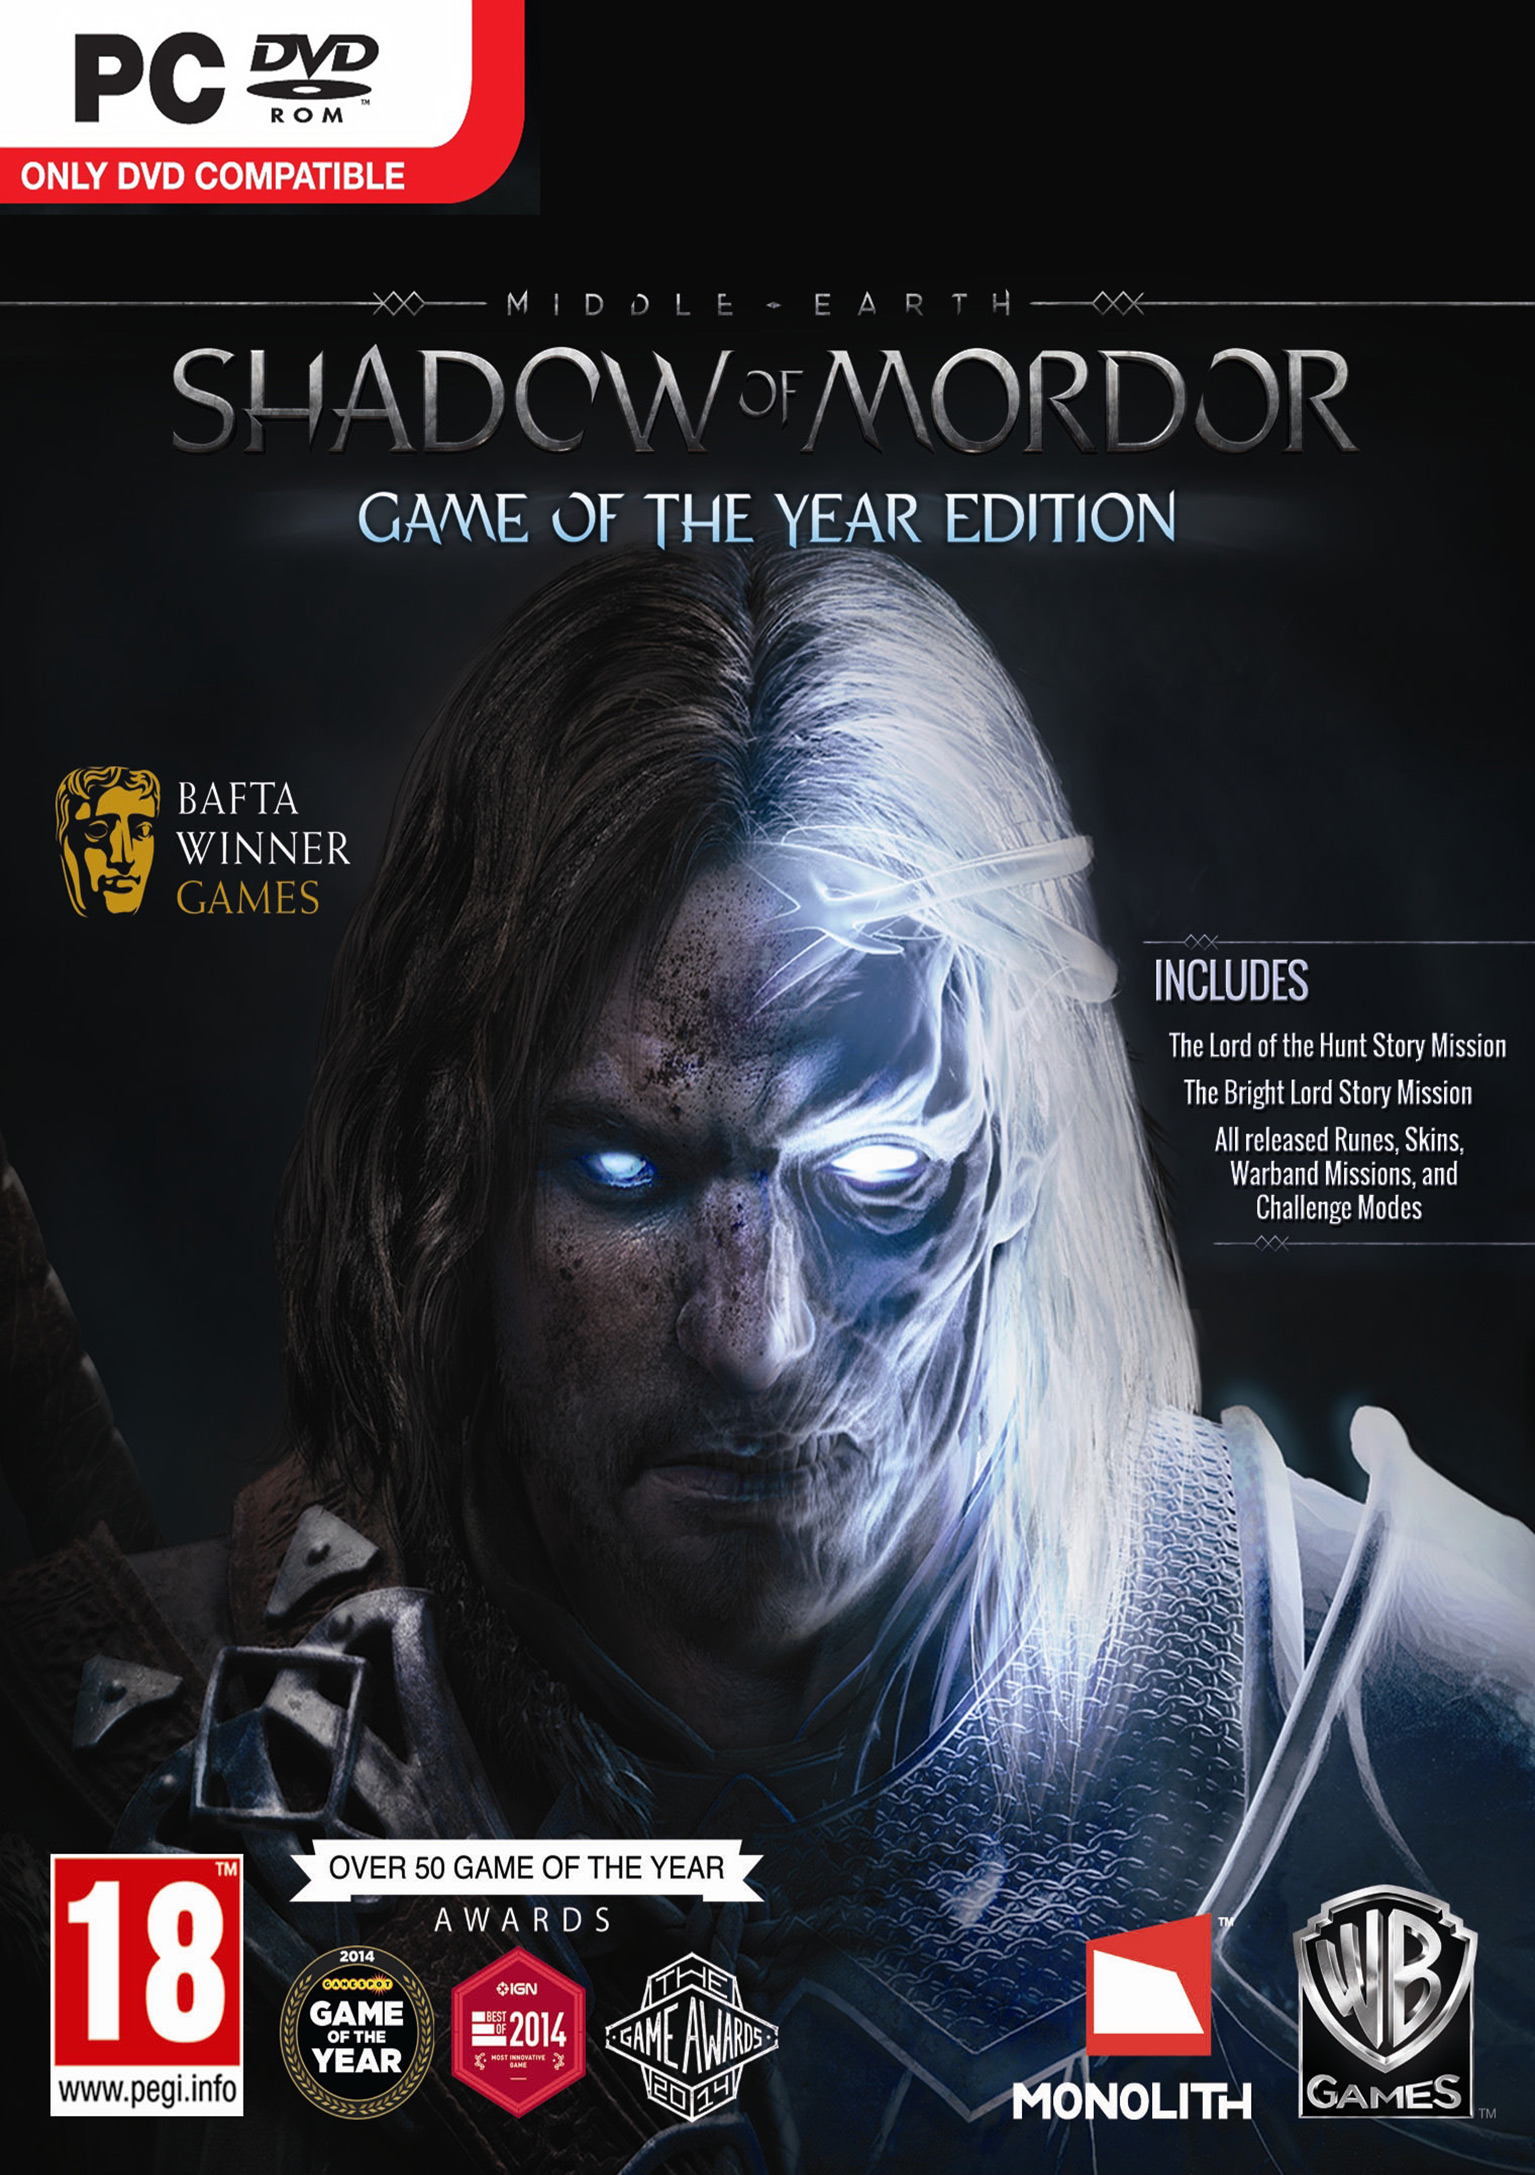 Middle-earth: Shadow of Mordor - Game of the Year Edition - predn DVD obal